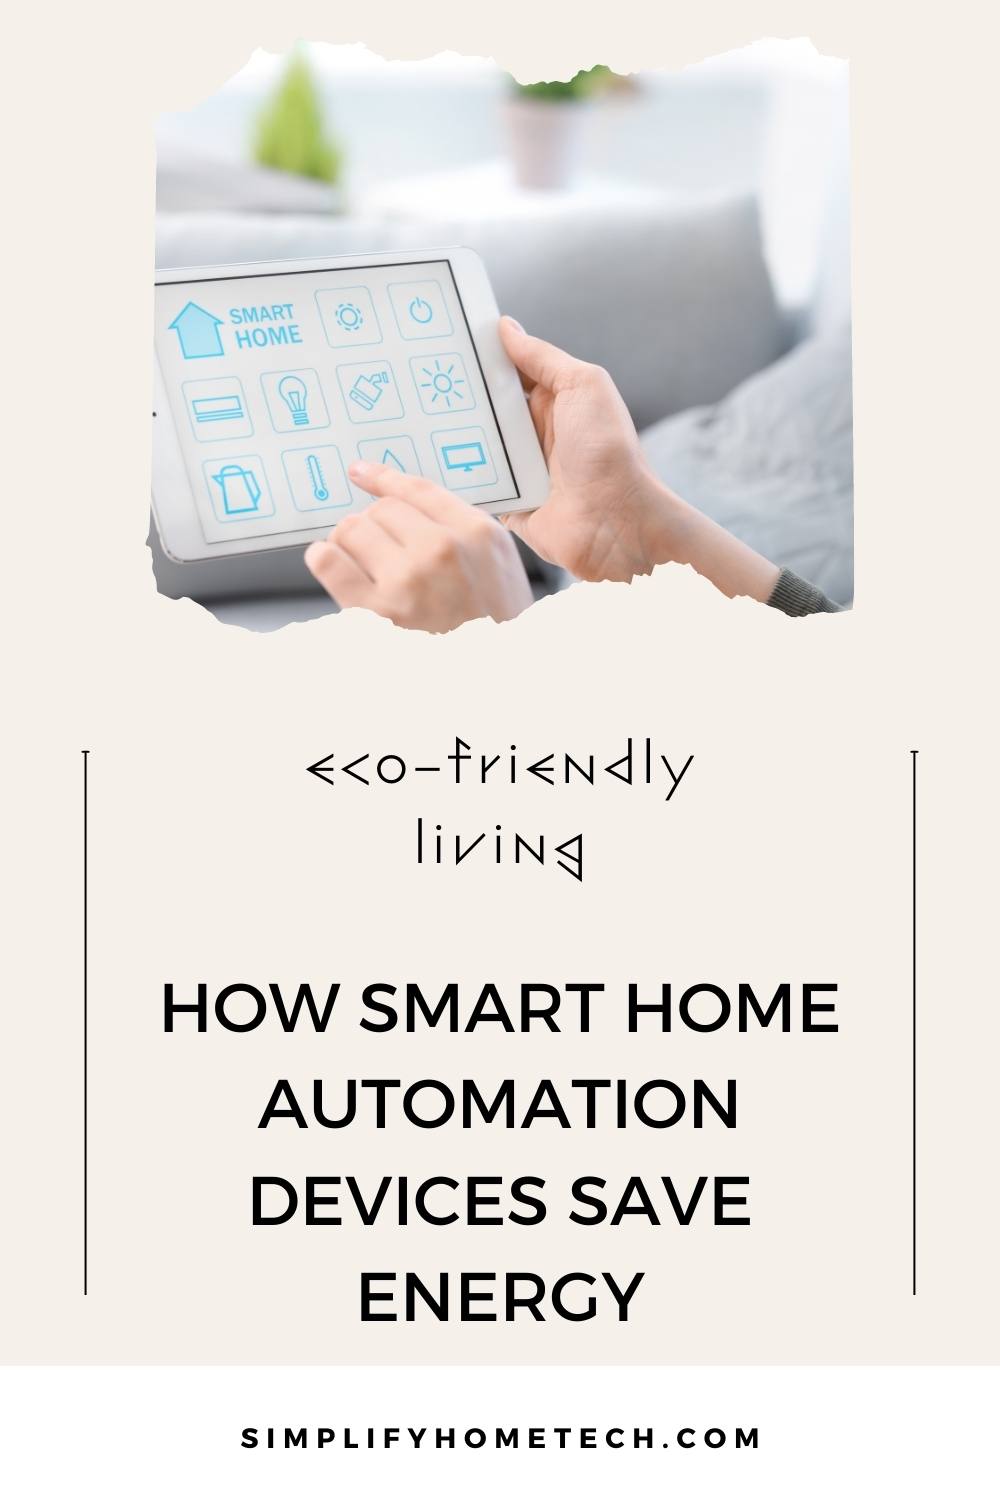 How Smart Home Automation Devices Save Energy